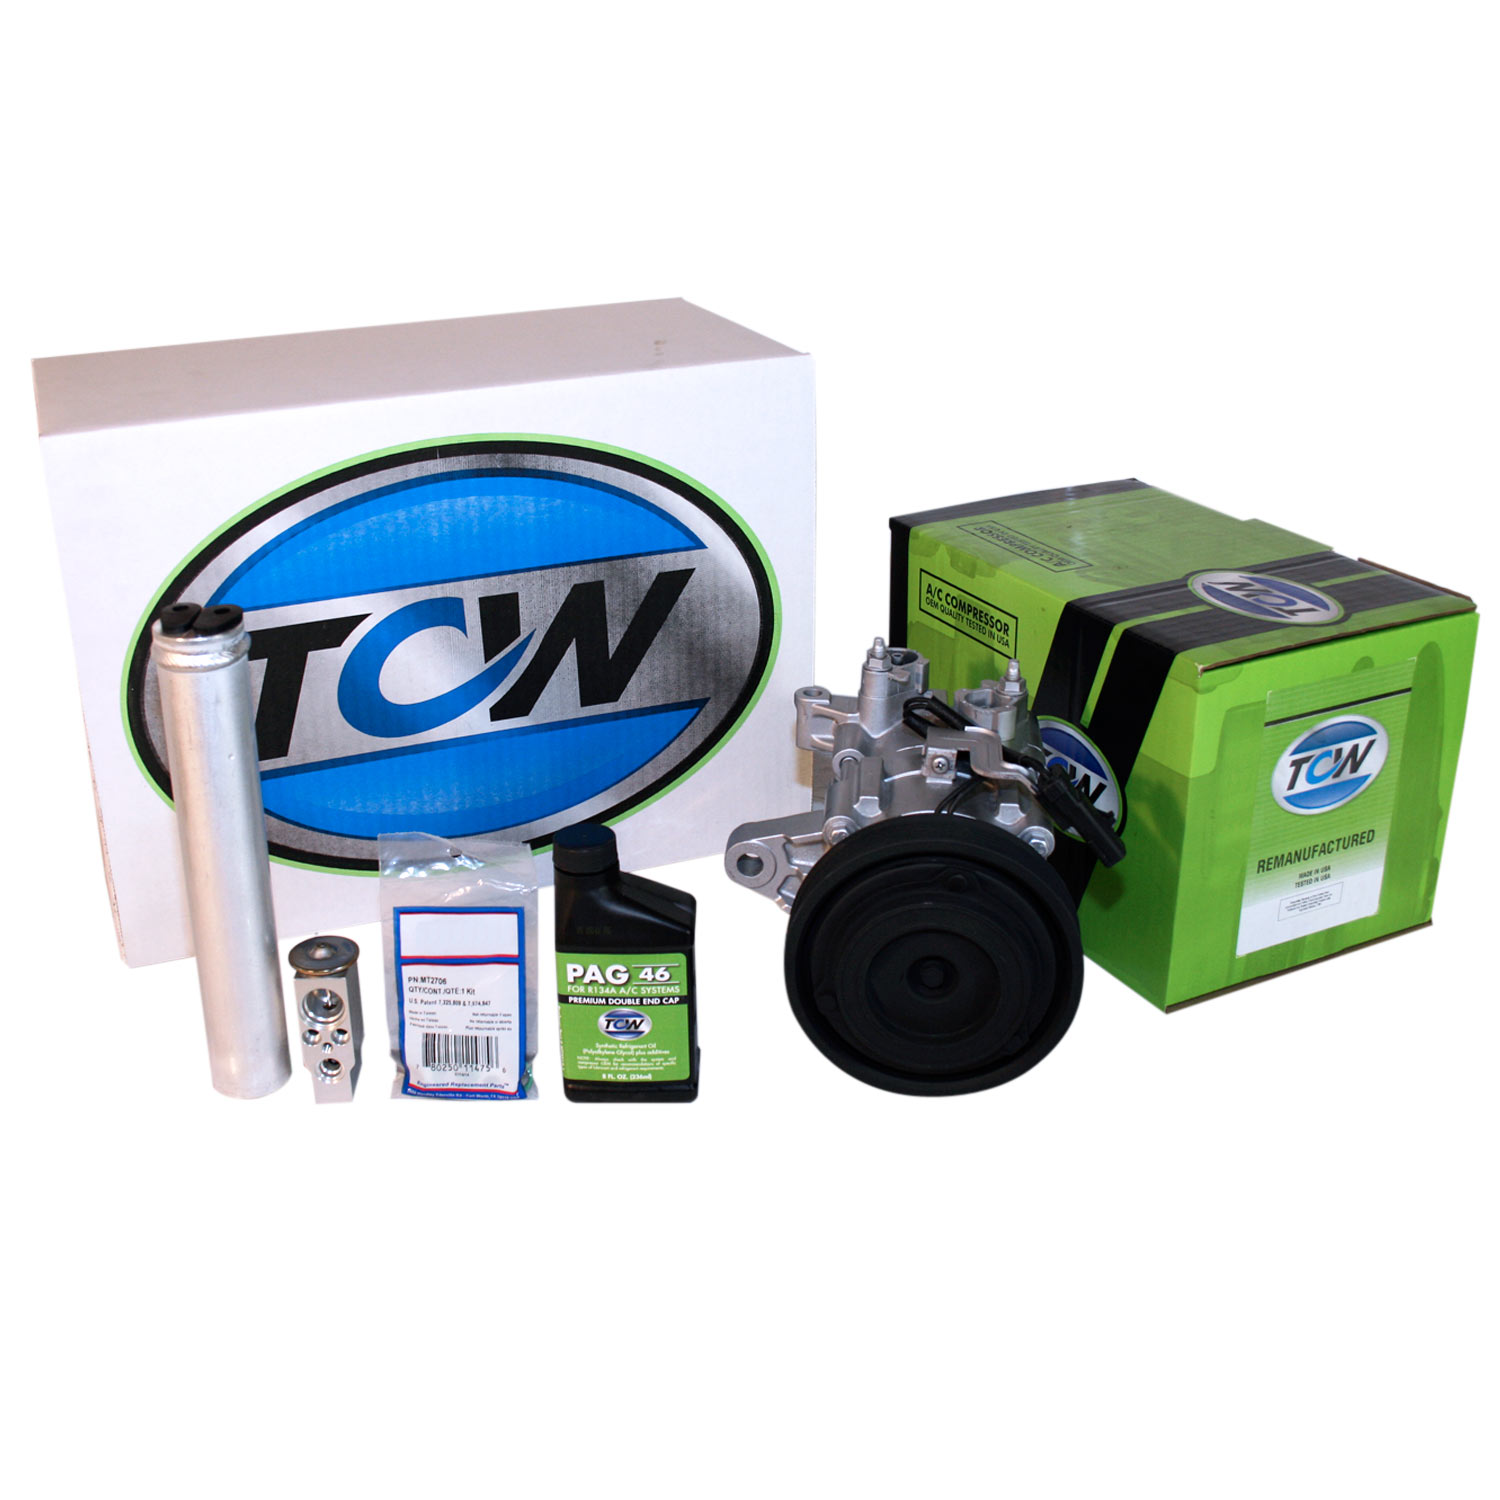 TCW Vehicle A/C Kit K1000279R Remanufactured Product Image field_60b6a13a6e67c